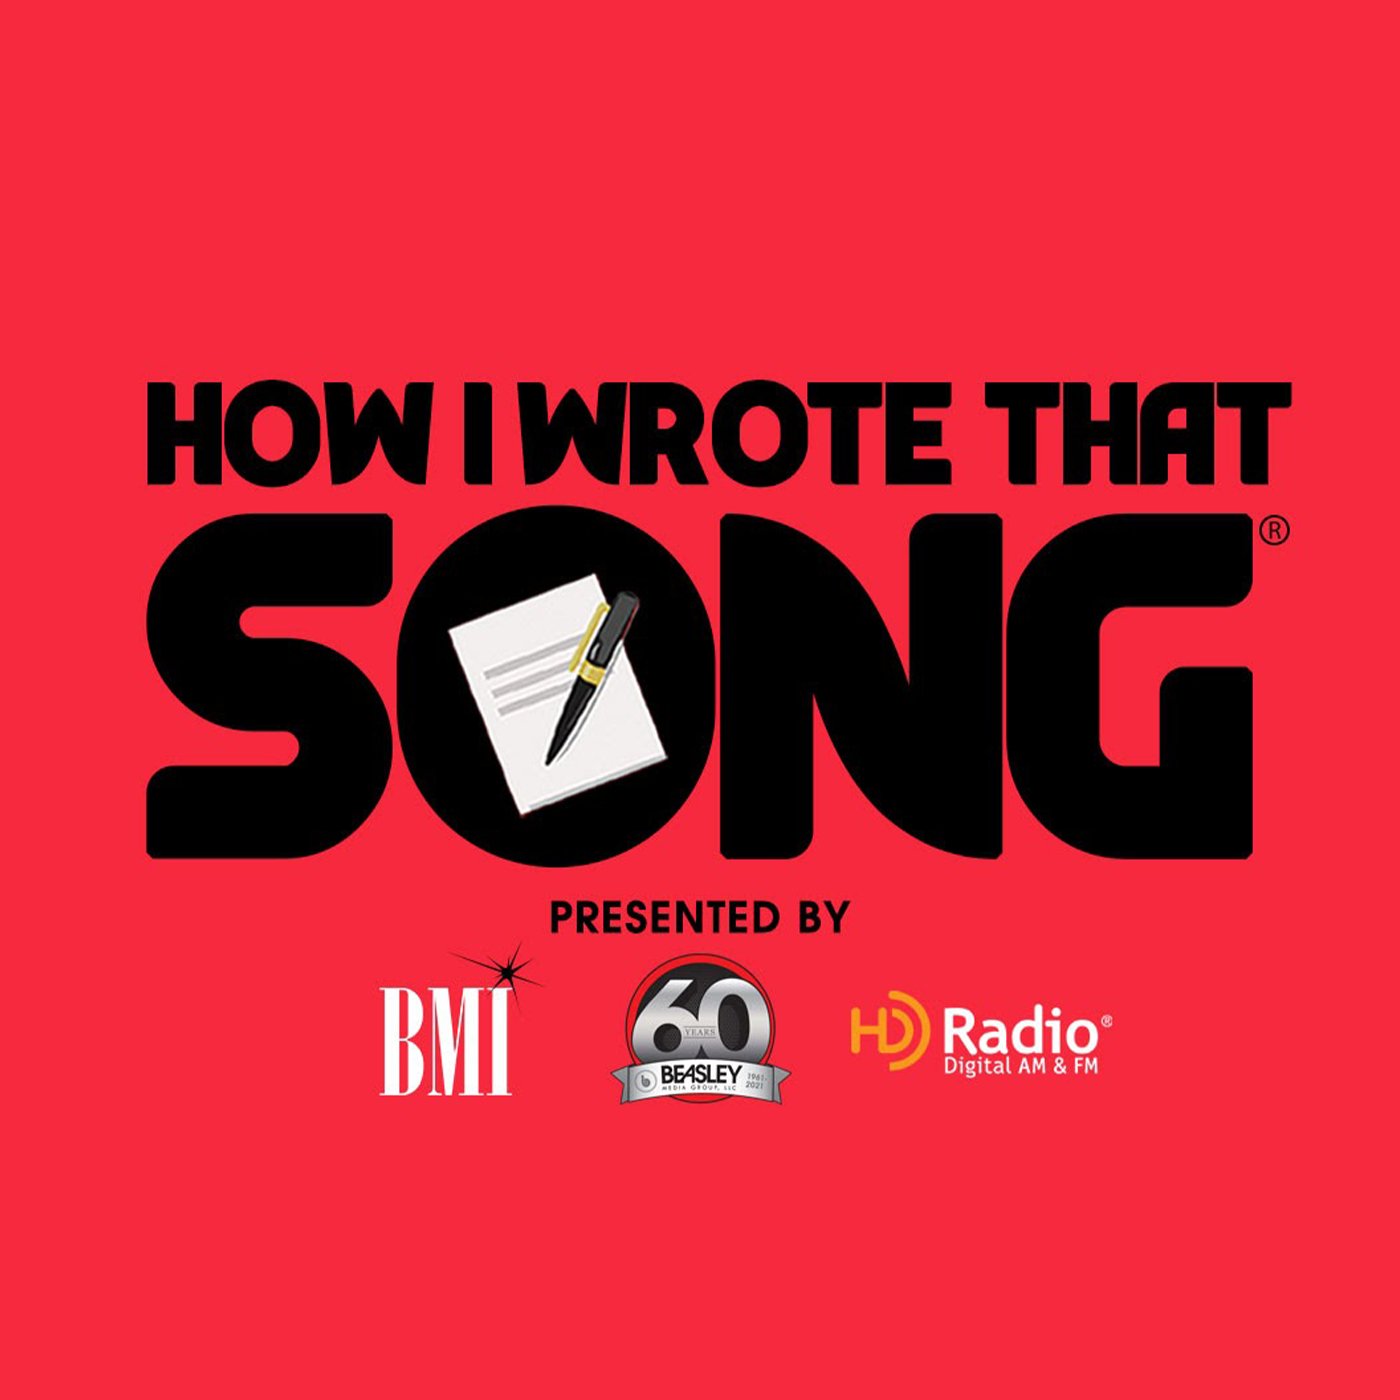 Chris Lane: How I Wrote That Song